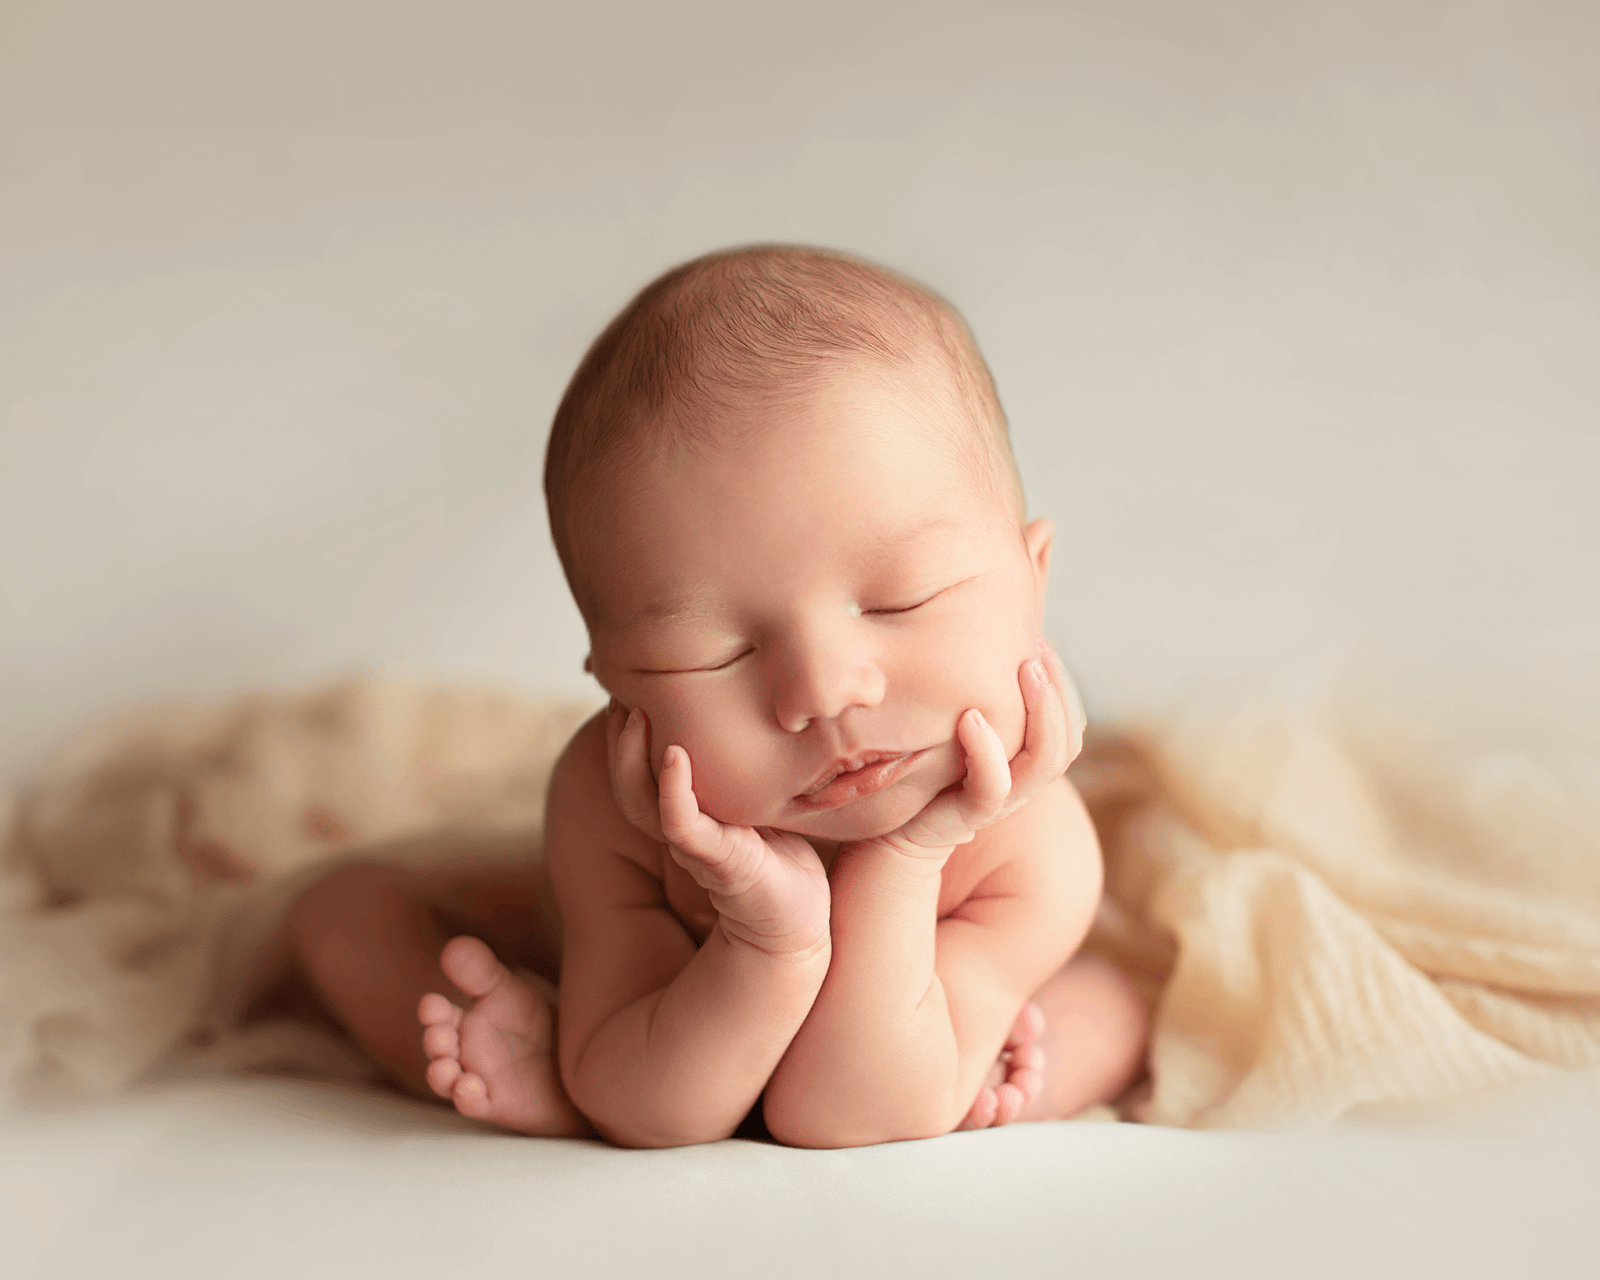 Newborn Photography Tips for New Parents